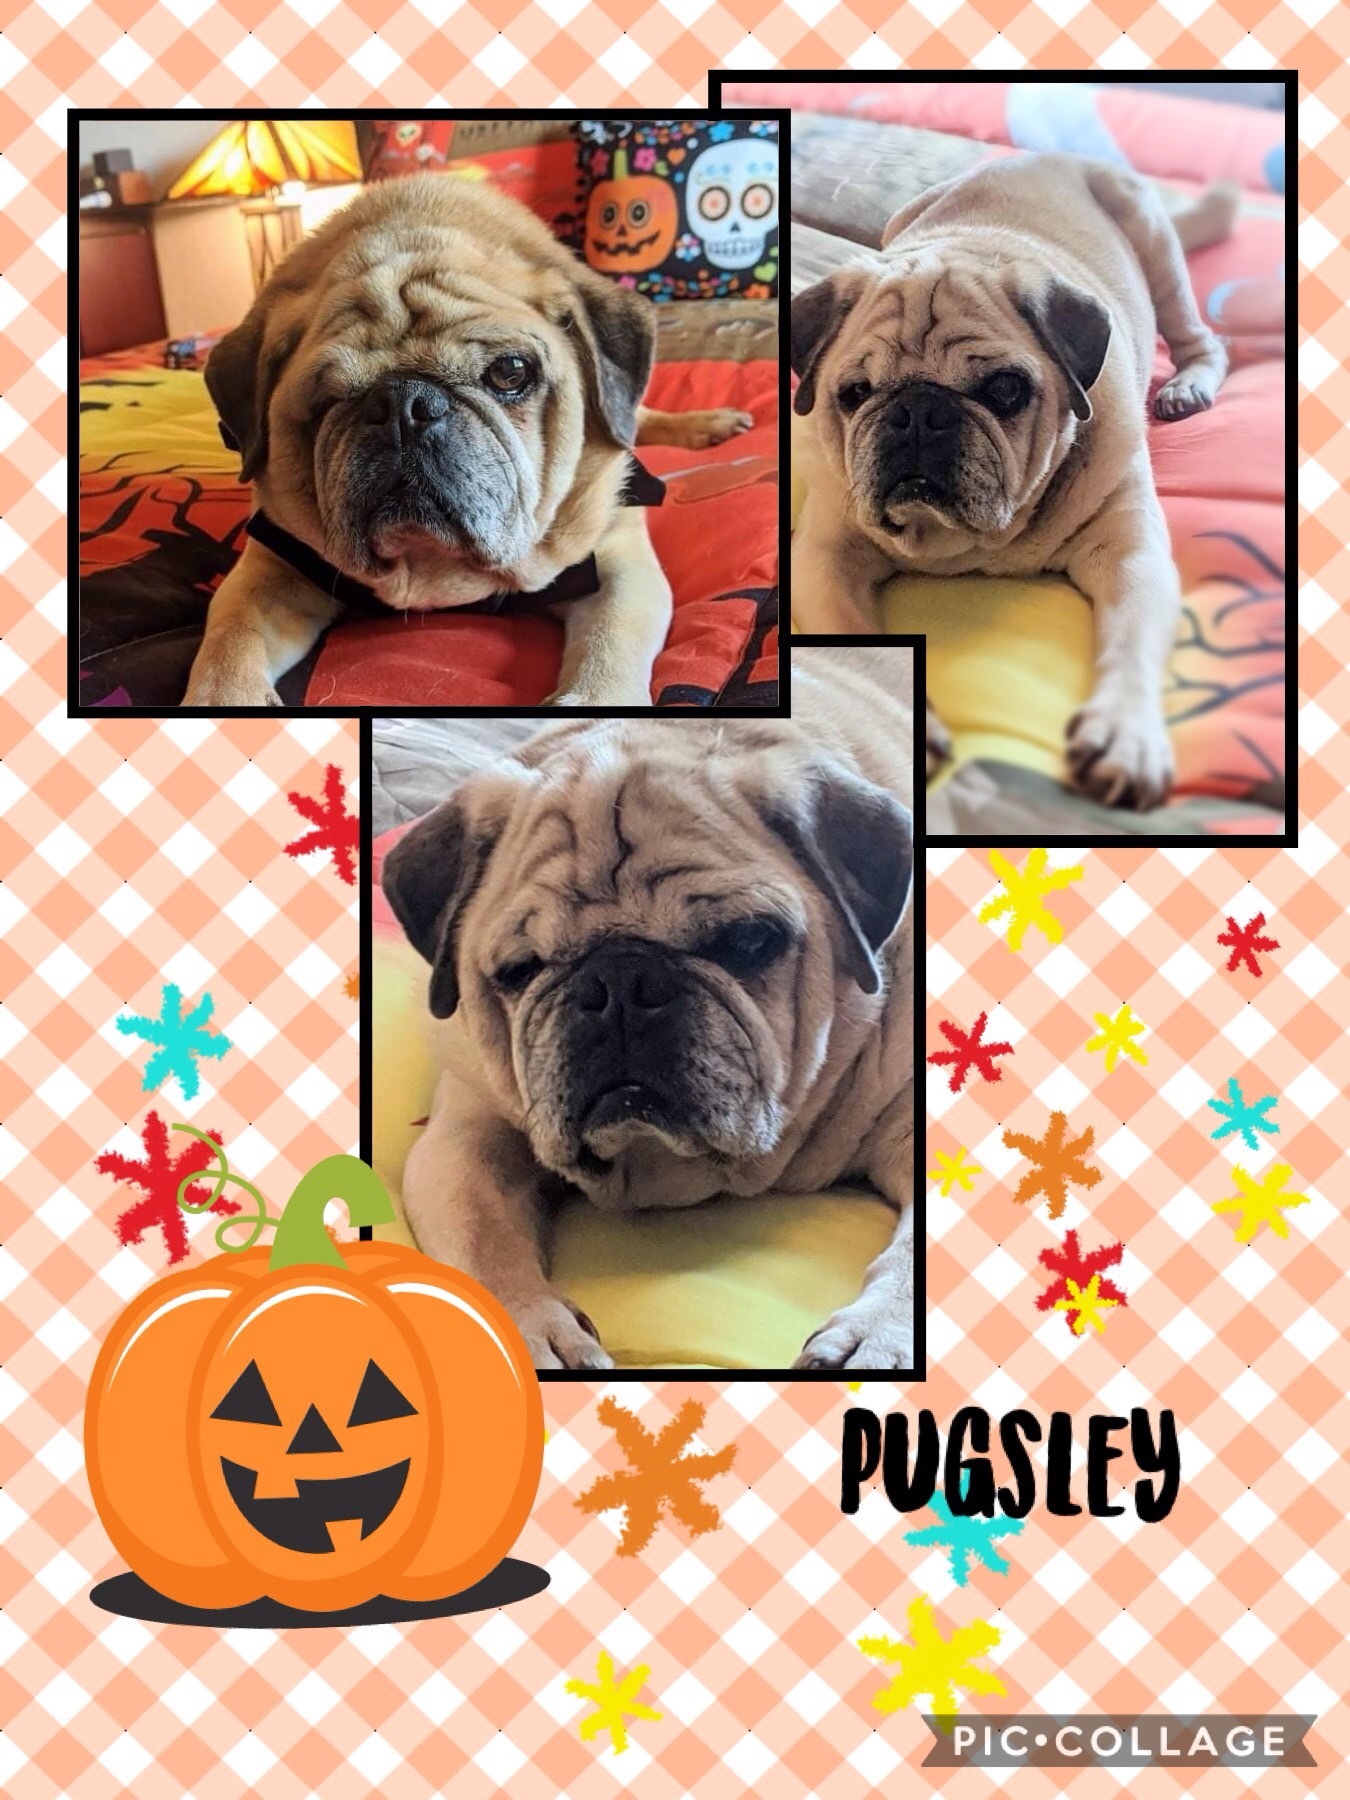 Pugsley detail page